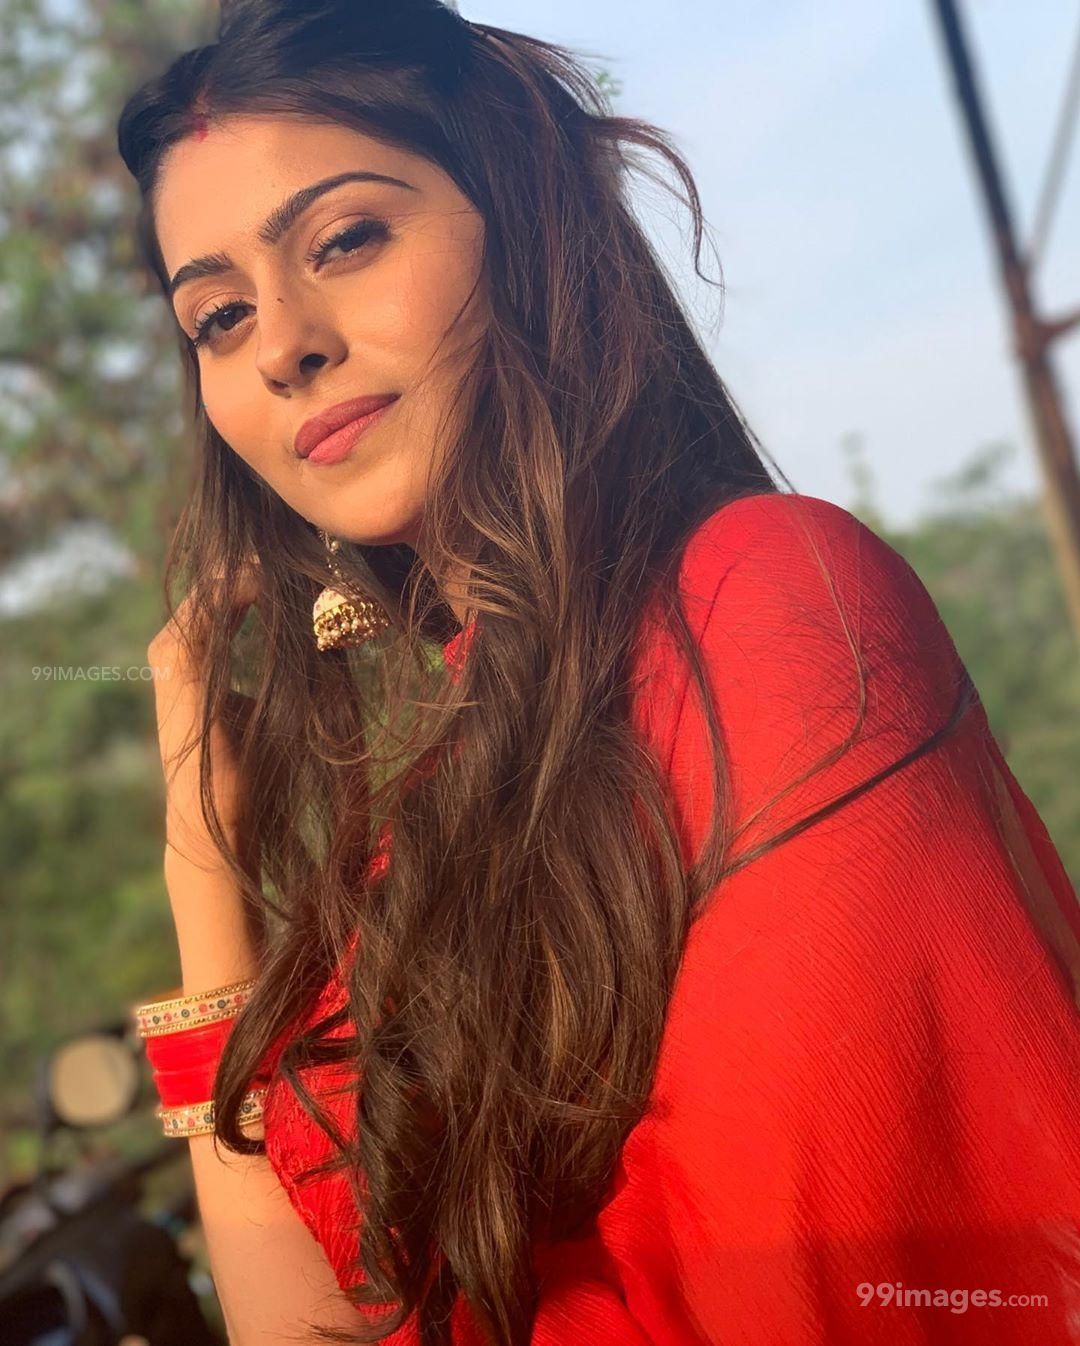 Aparna Dixit Photos: Latest Aparna Dixit Images, HD Wallpapers, Pictures,  Gallery of Actor Aparna Dixit - Fresherslive